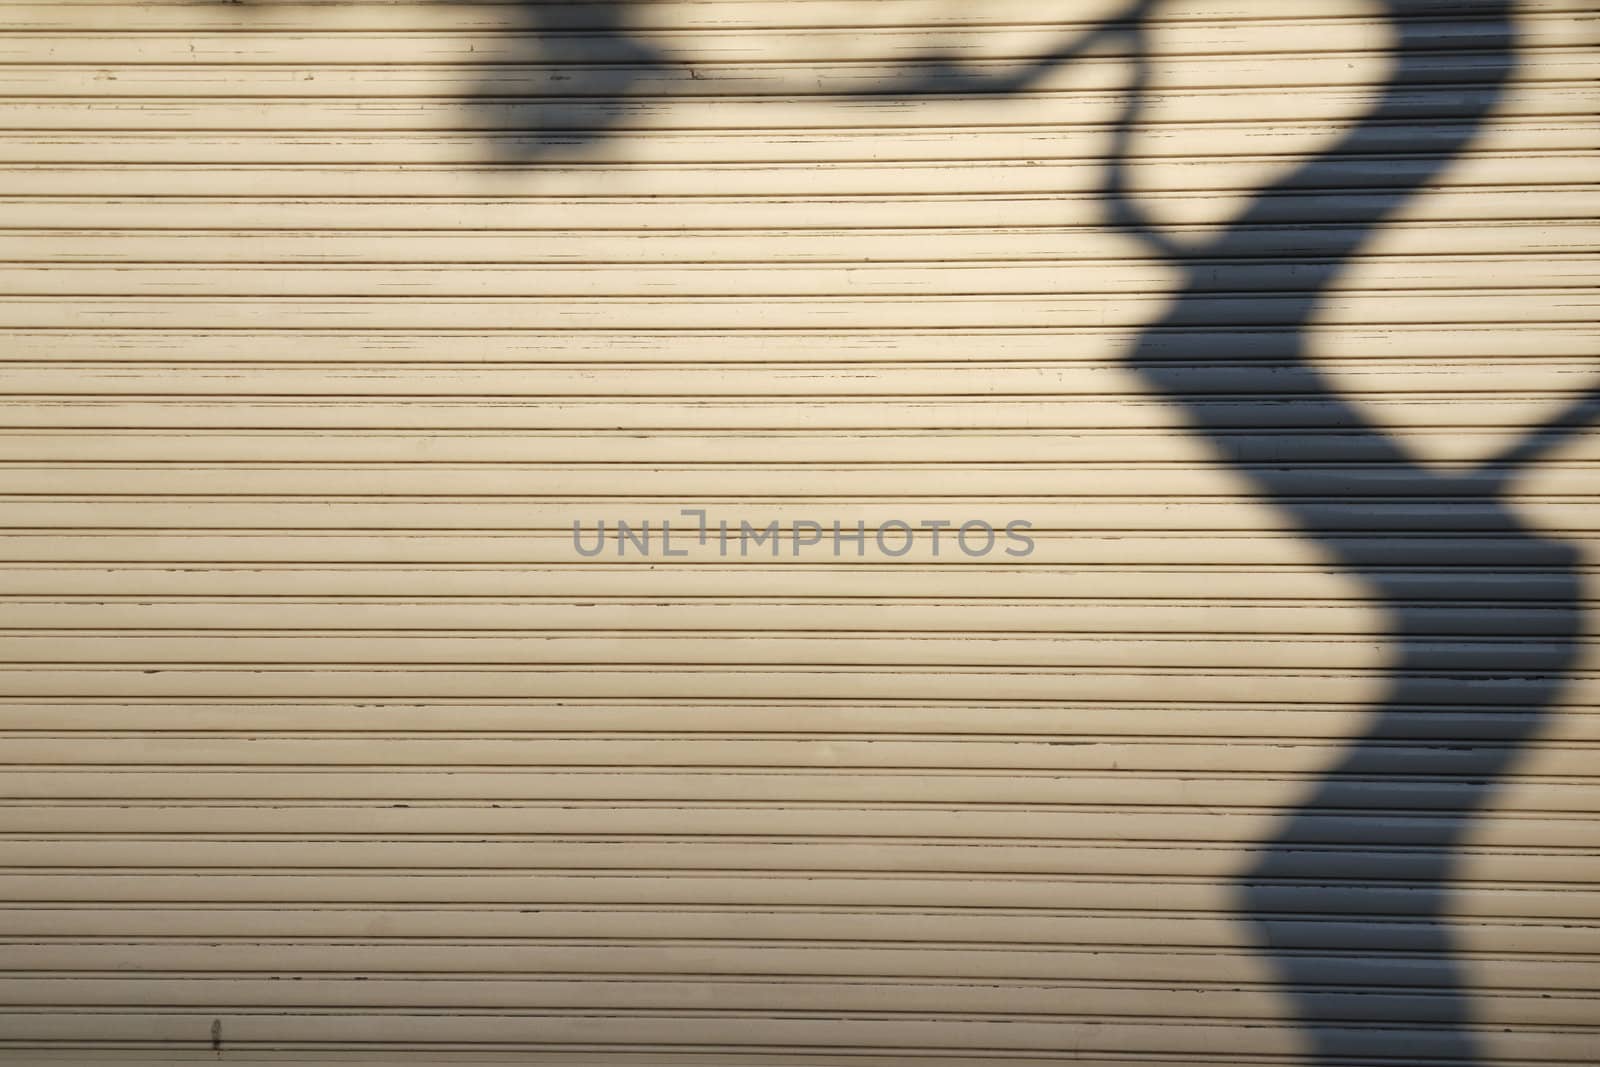 scenic tree shadow made by evening sun on the louver wall background in Tokyo Japan